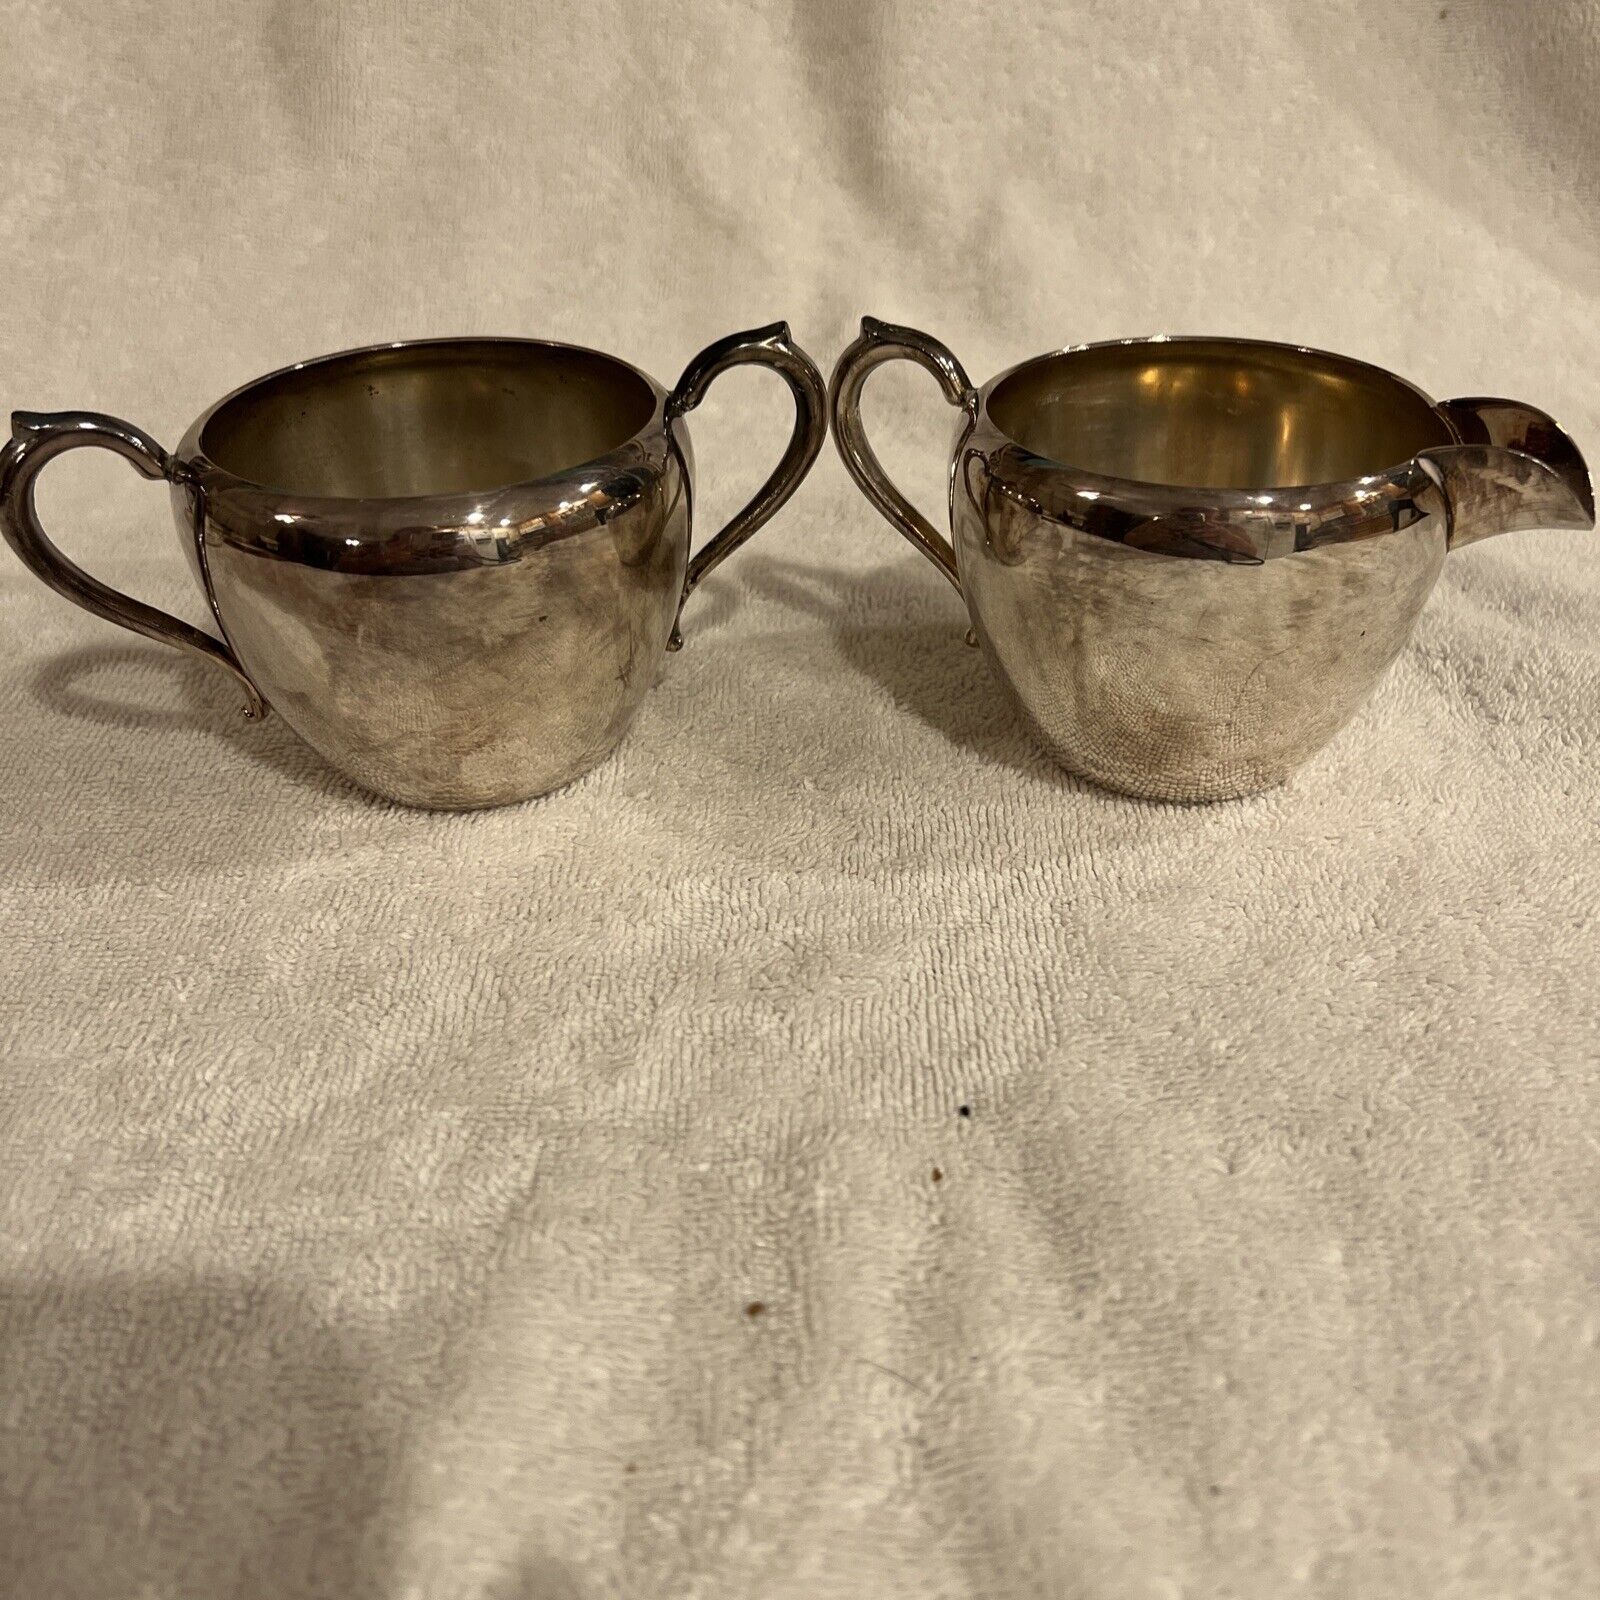 Vintage Wilcox S.P. Co. [IS] Silver Plate Sugar bowl and creamer Art Deco style